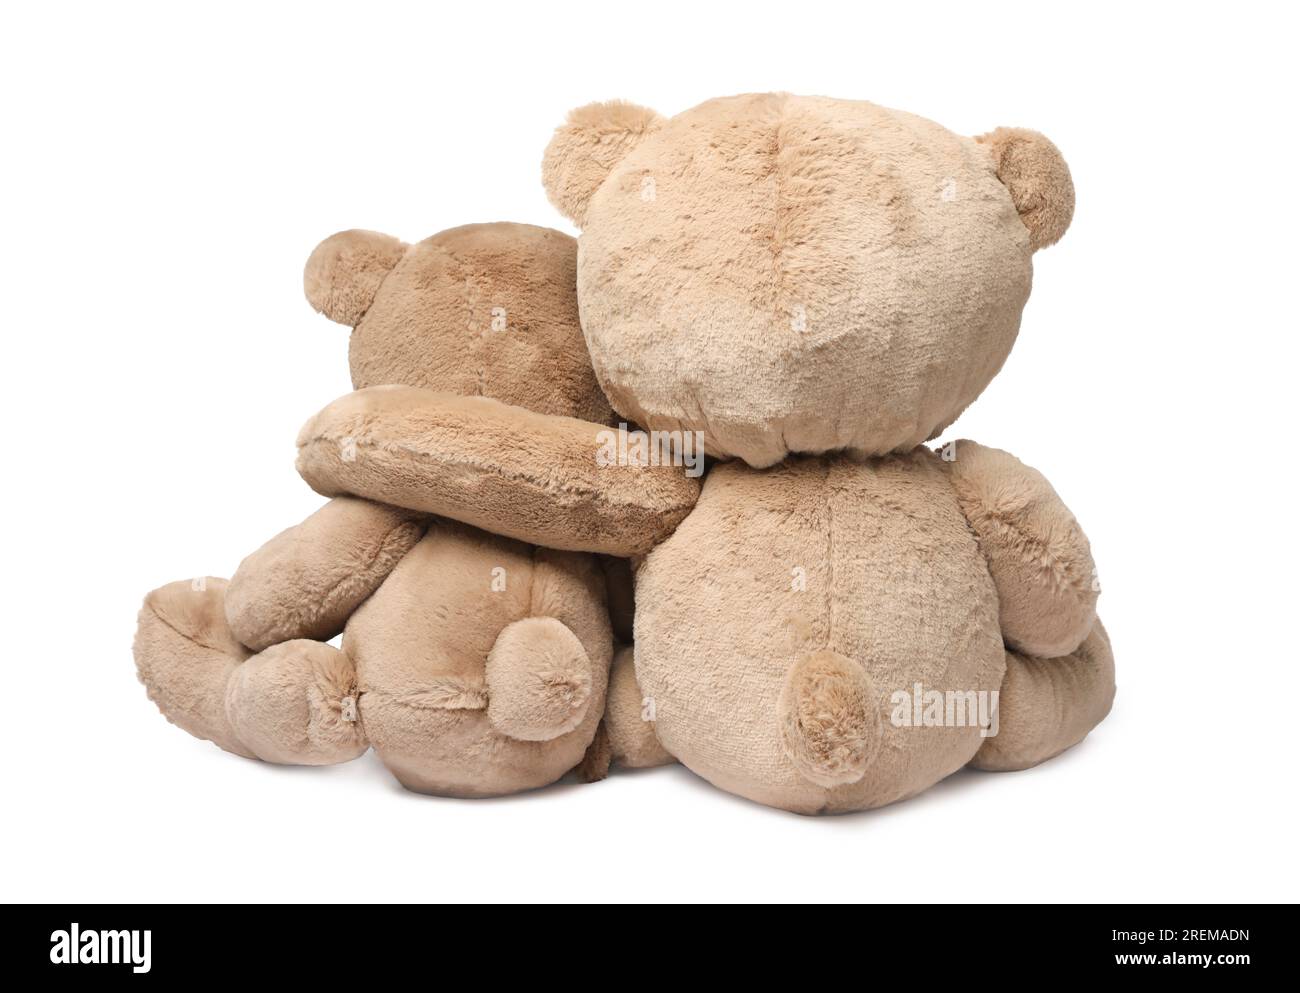 https://c8.alamy.com/comp/2REMADN/cute-teddy-bears-isolated-on-white-back-view-2REMADN.jpg